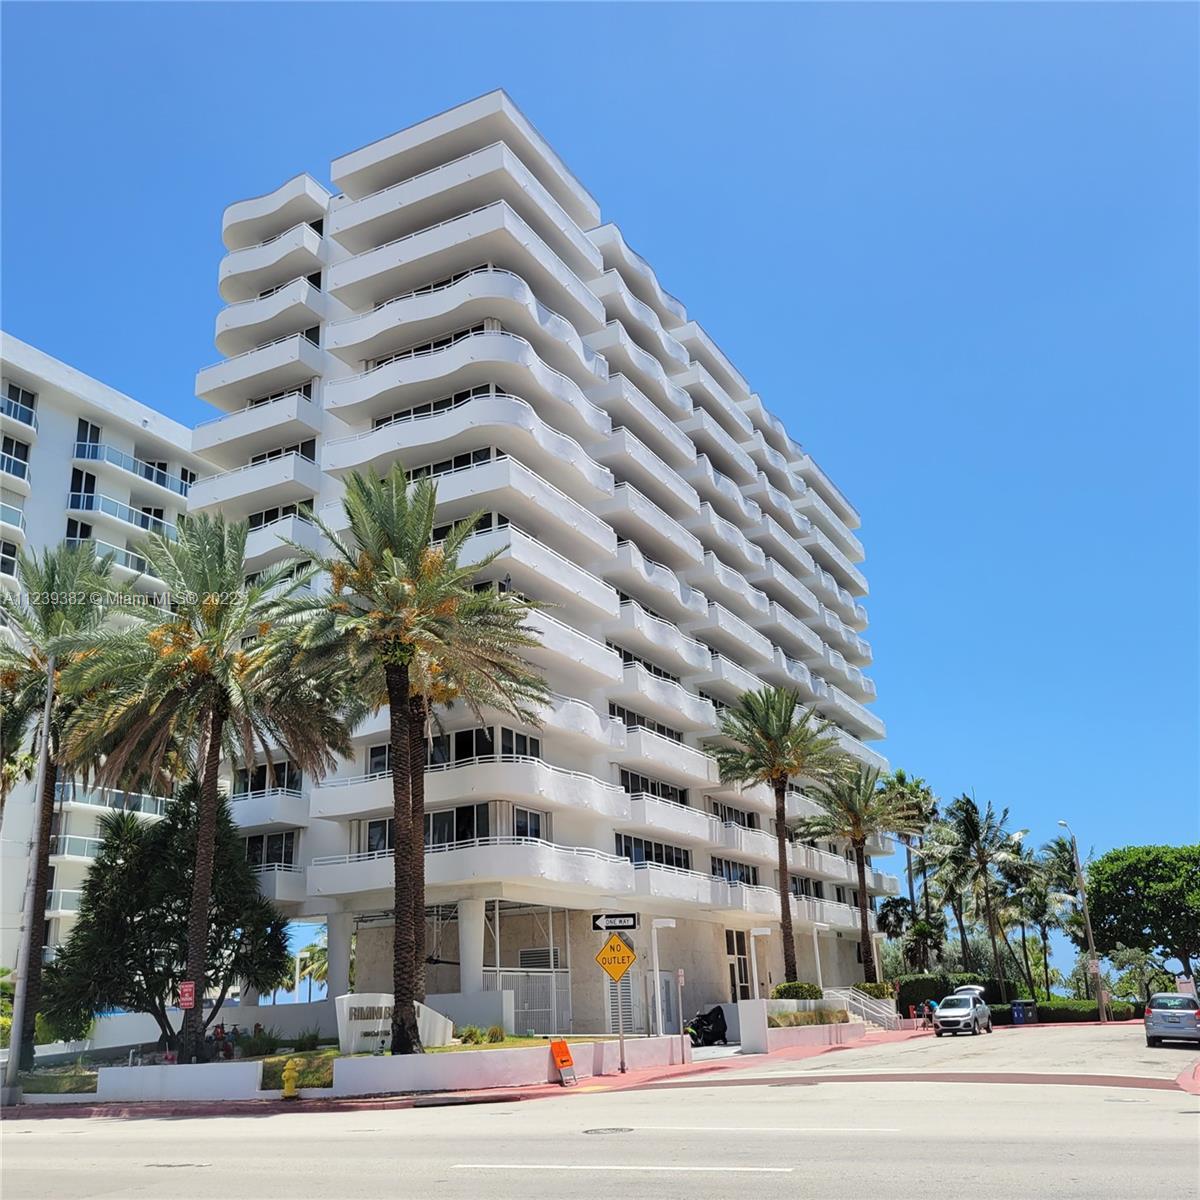 Rimini Beach Condo Building with direct access to Miami Beach oceanfront area in renowned Surfside. 